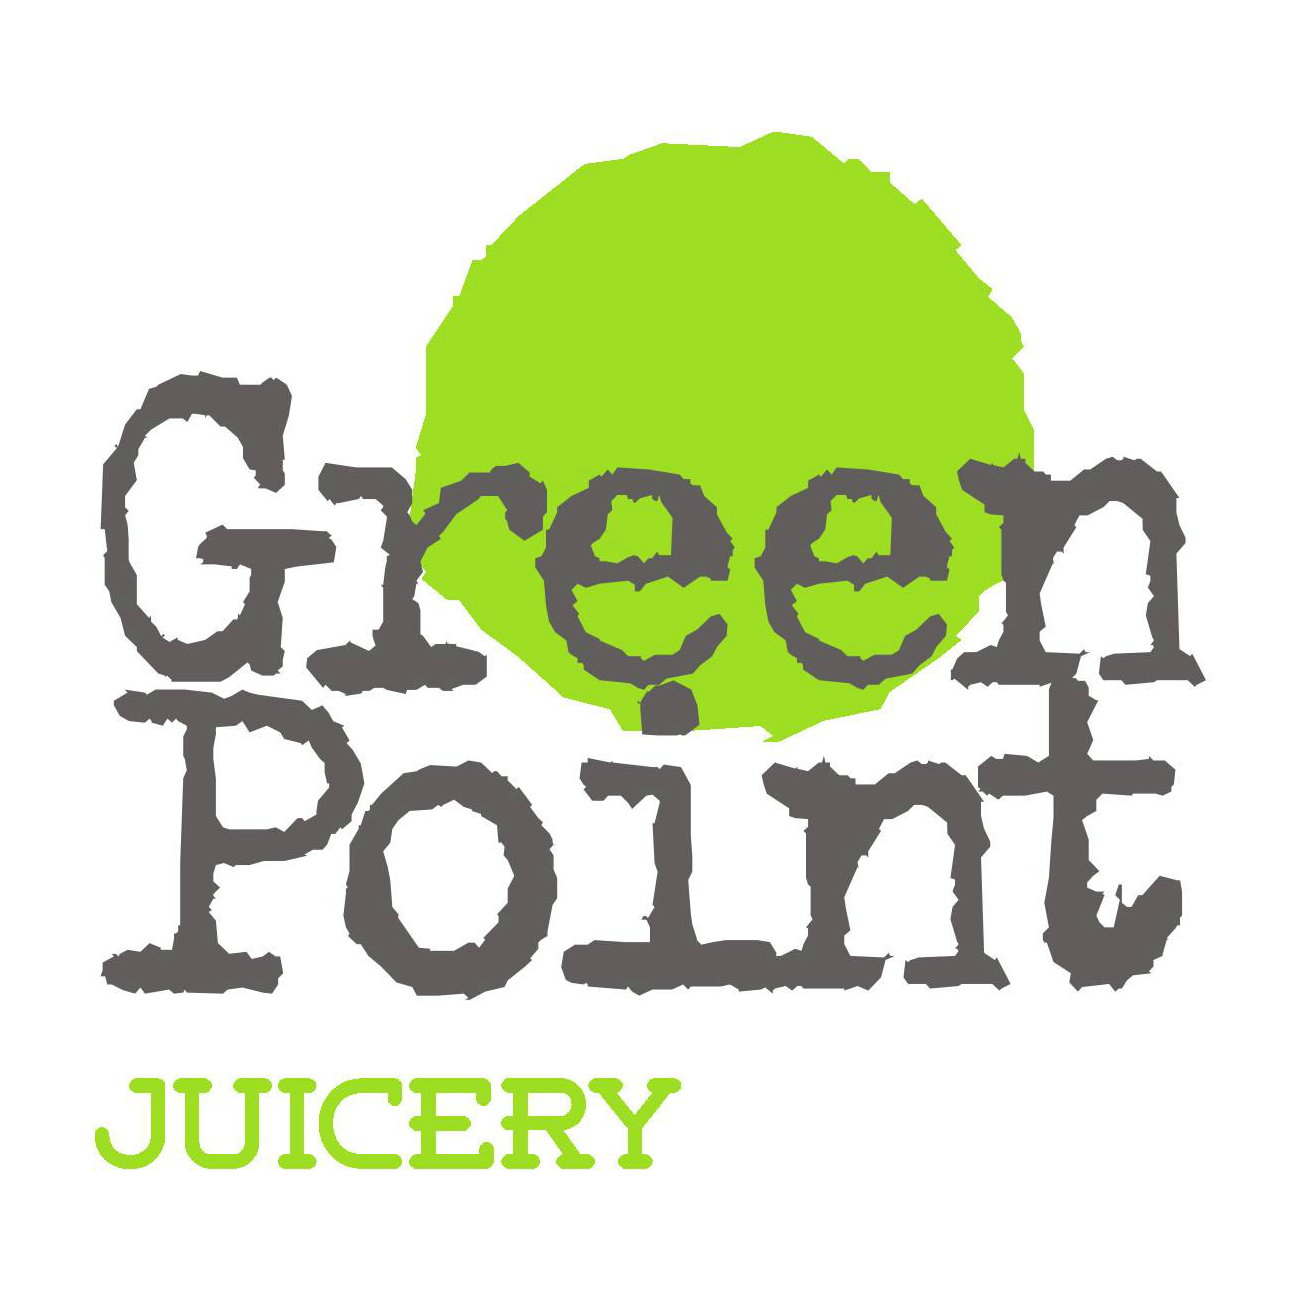 Green Point Juicery, Links to Facebook Page